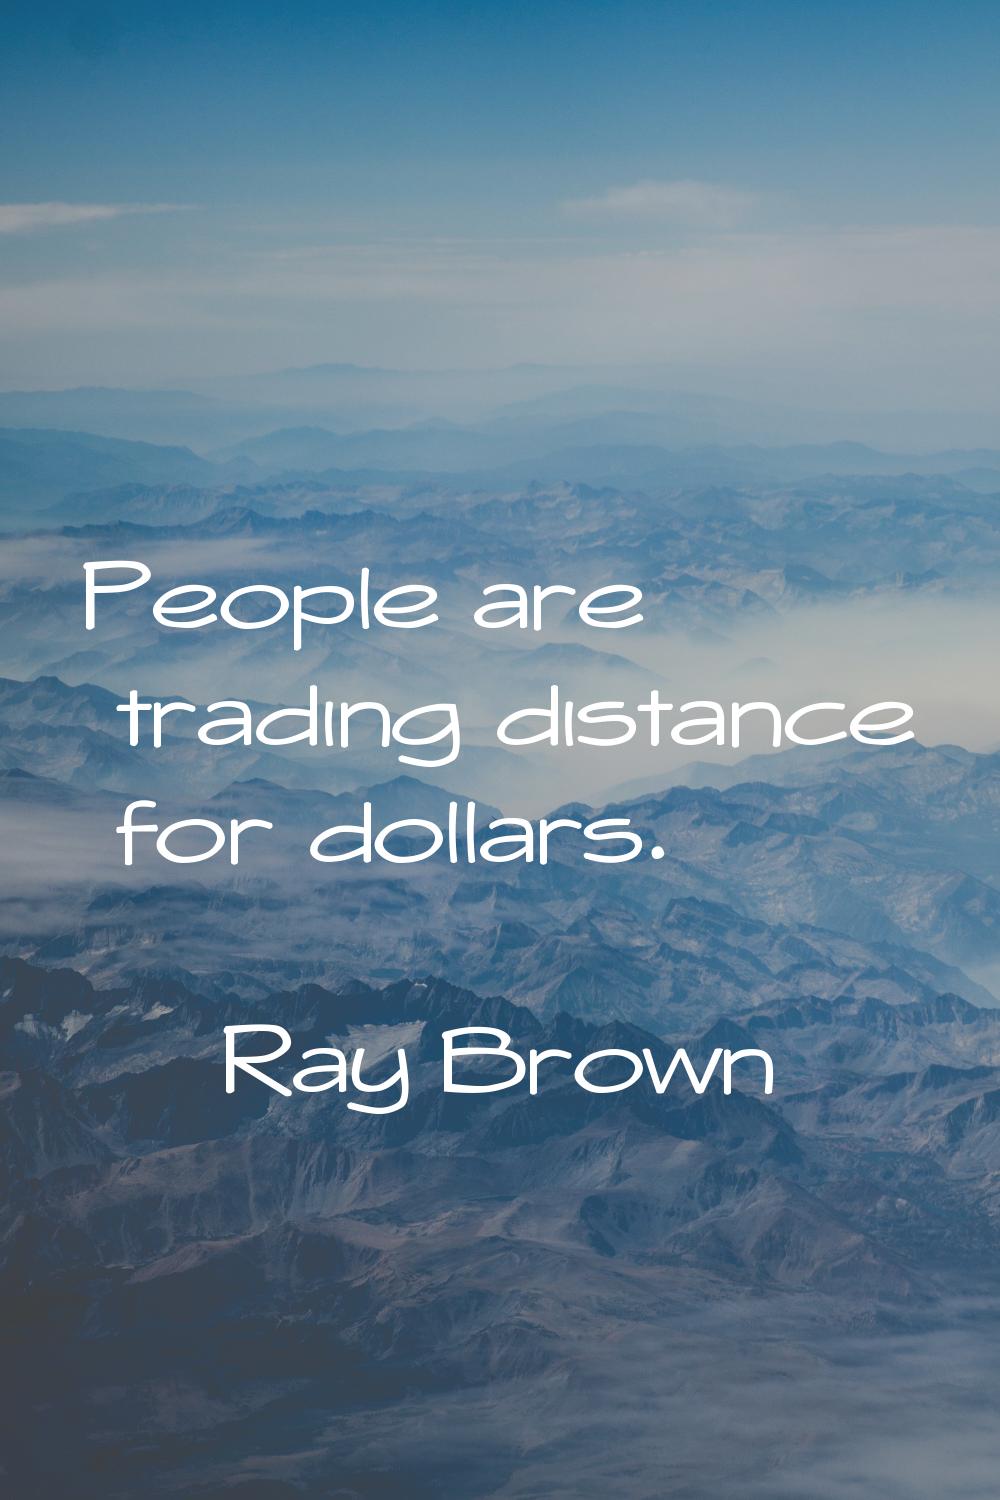 People are trading distance for dollars.